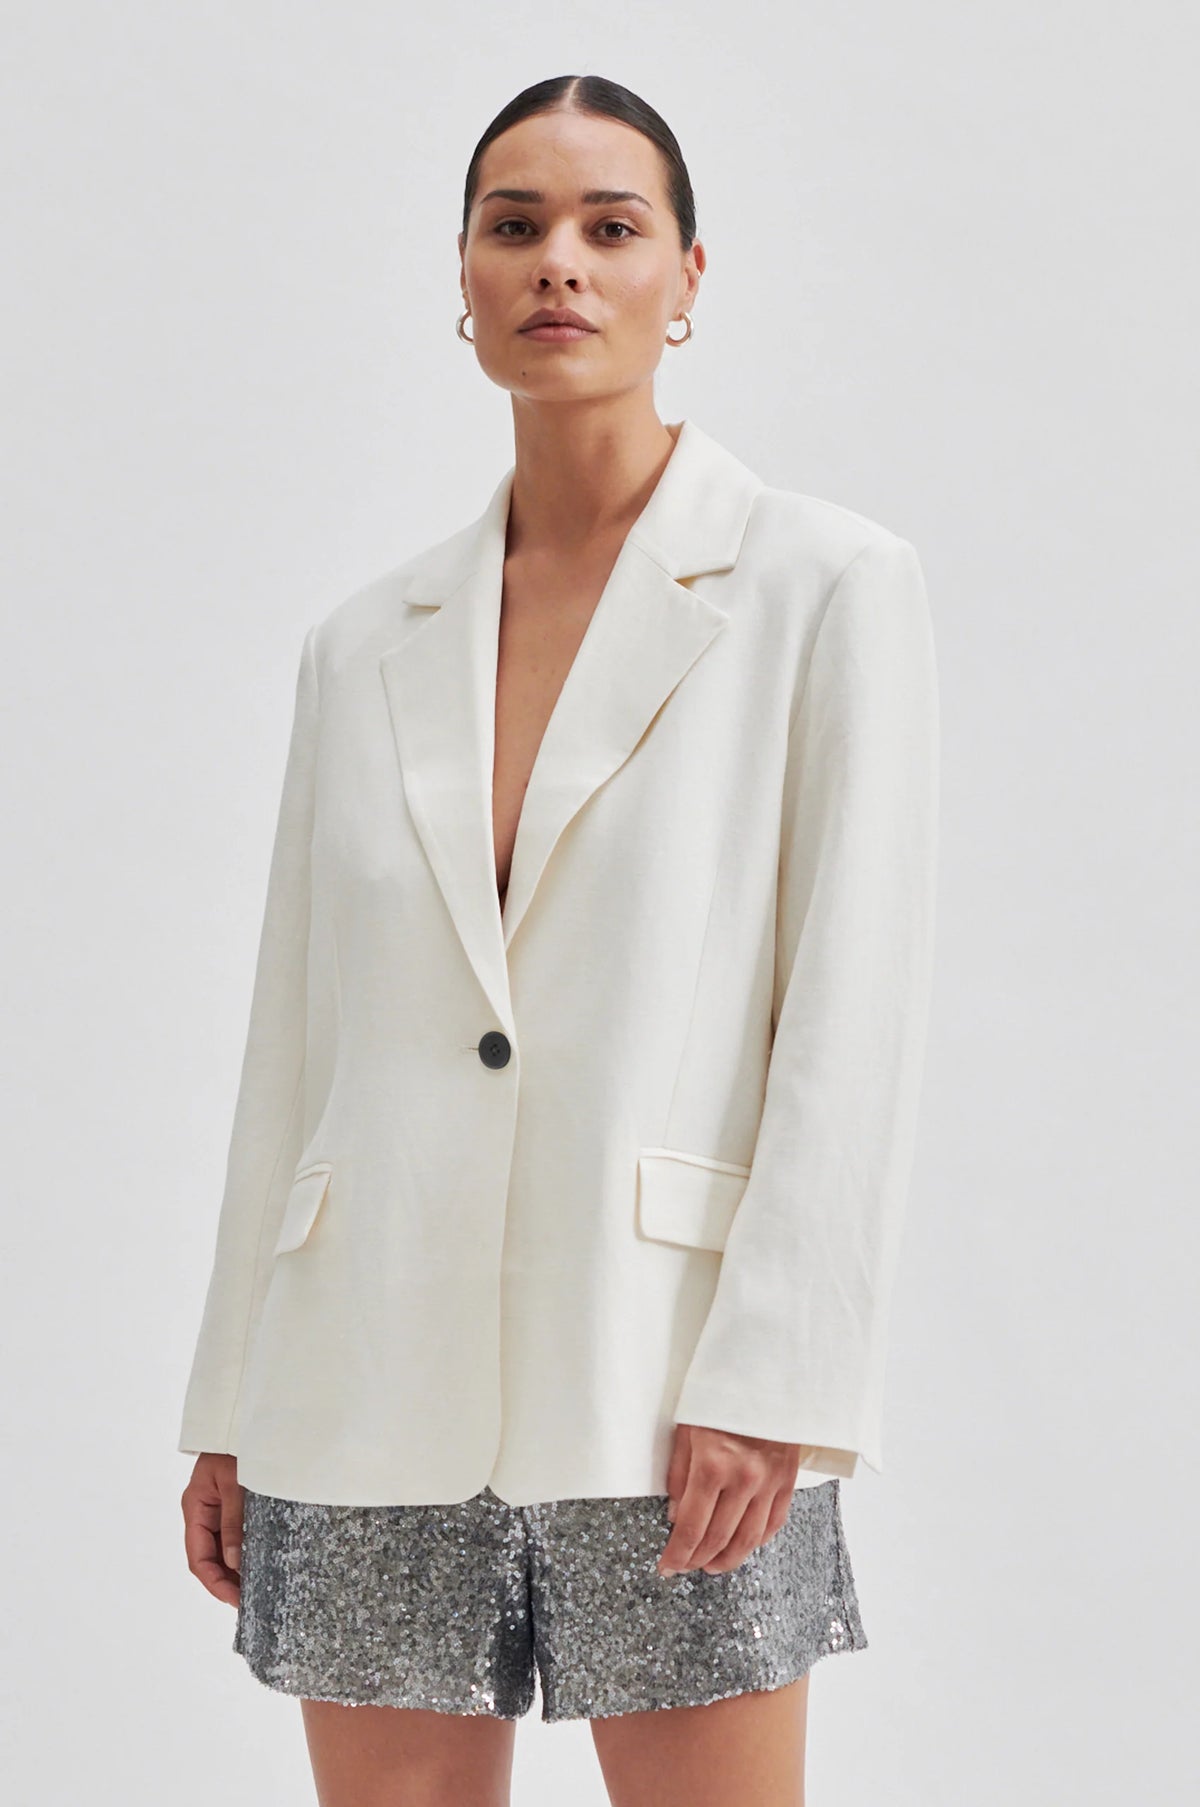 White linen jacket with single breasted solo black button fastening